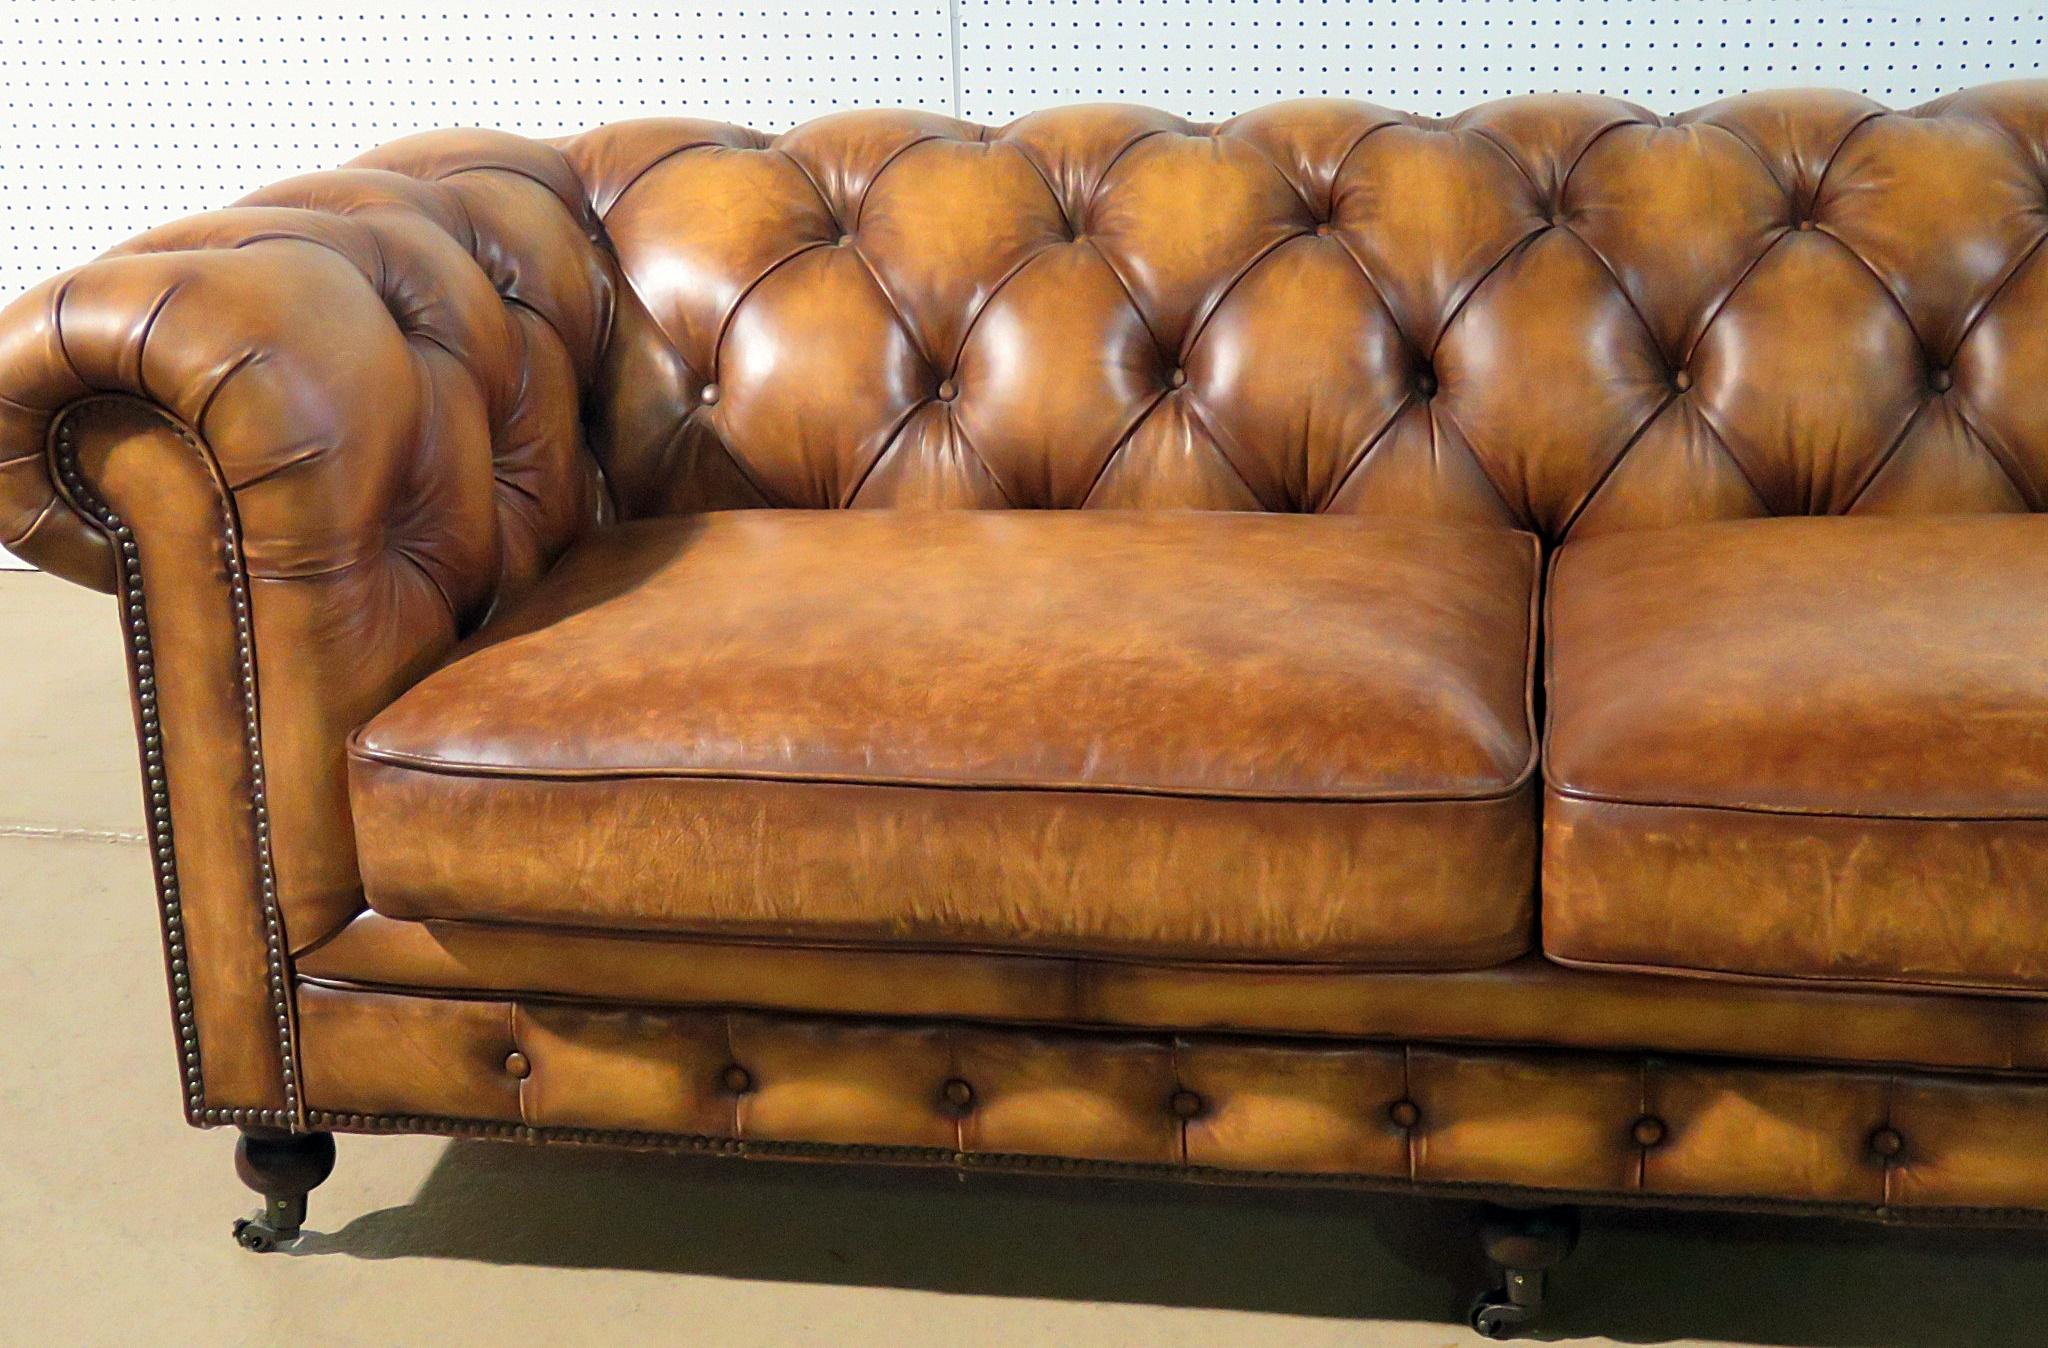 Distressed leather Chesterfield sofa with nailhead trim on casters.